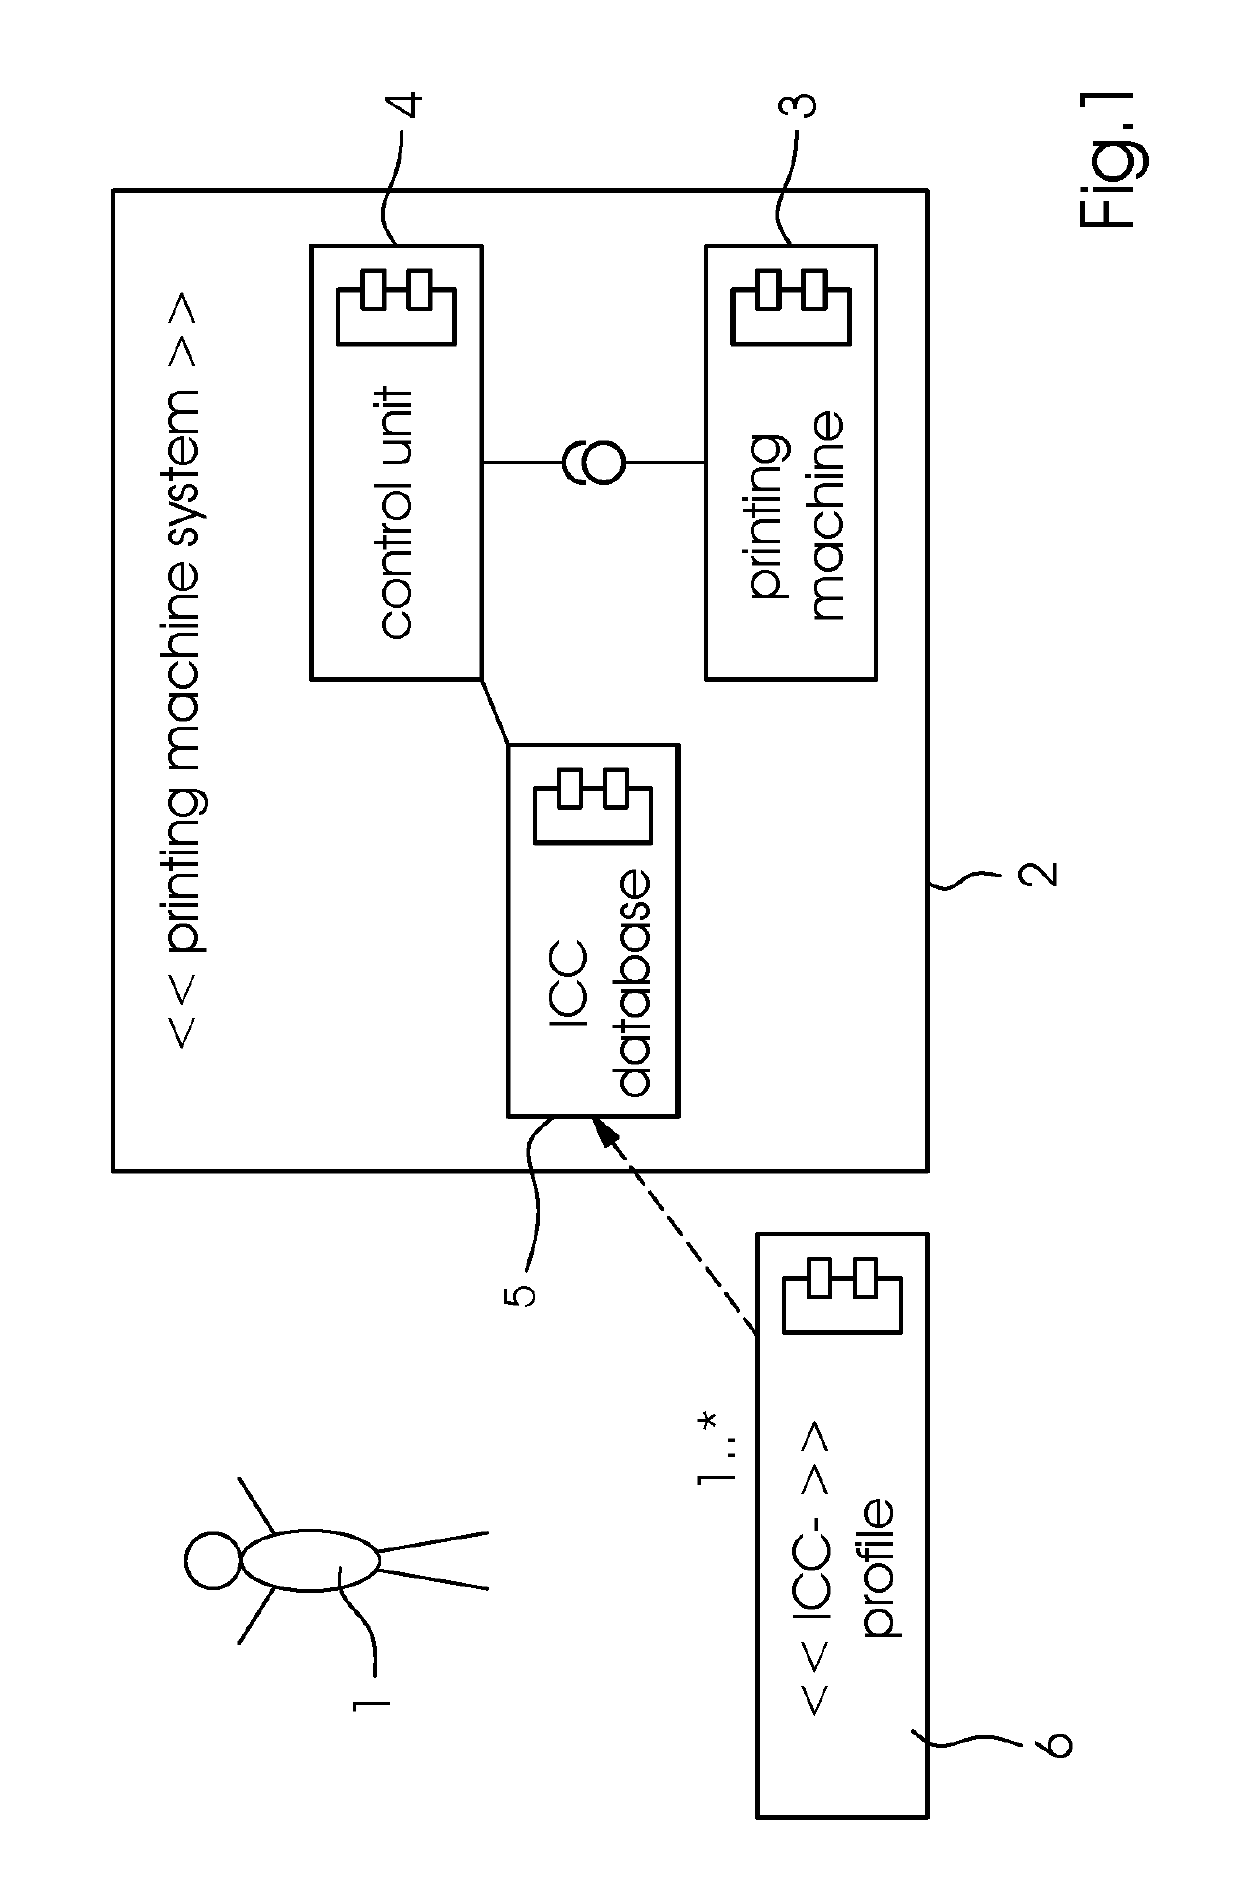 Method for optimized color control in a printing machine